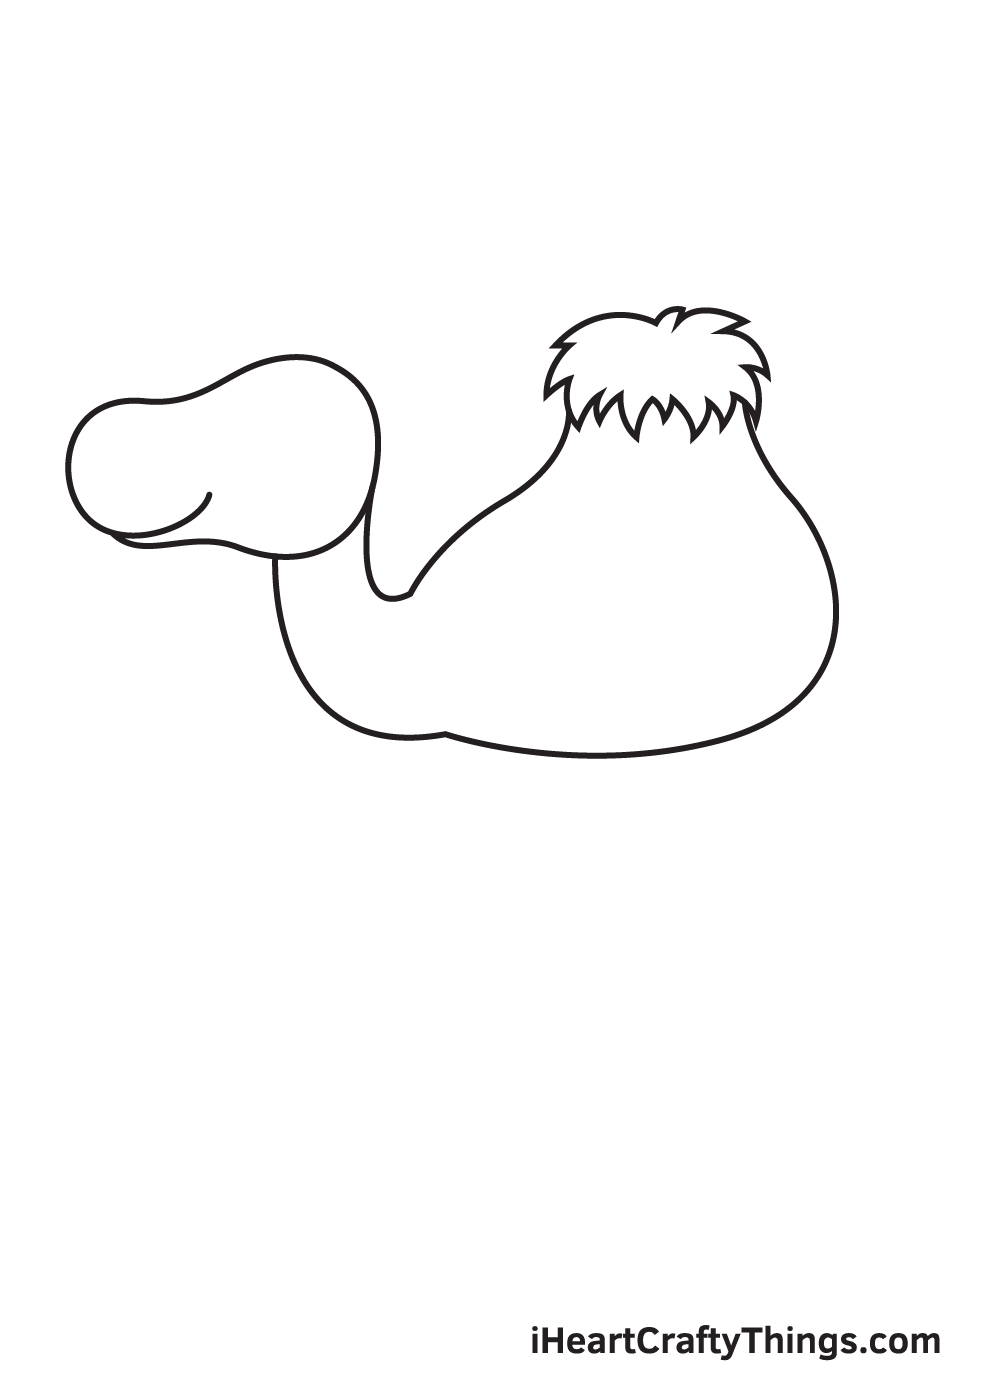 camel drawing step 3